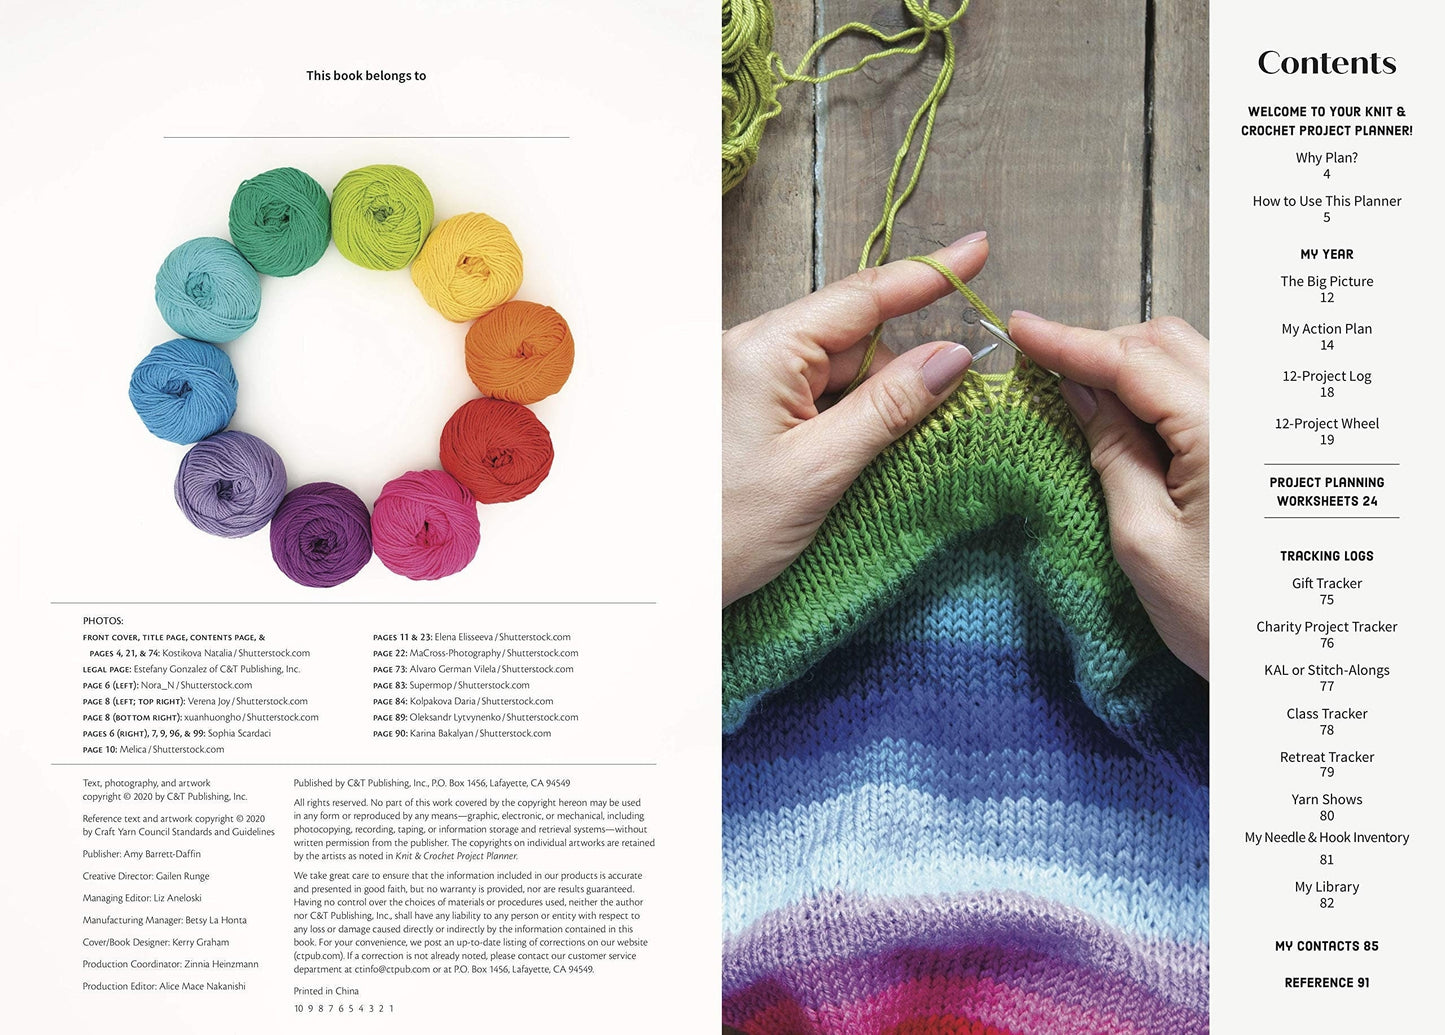 Knit & Crochet Project Planner by Sophie Scardaci and Kerry Graham  96 page organizer for 12 knit or crochet projects